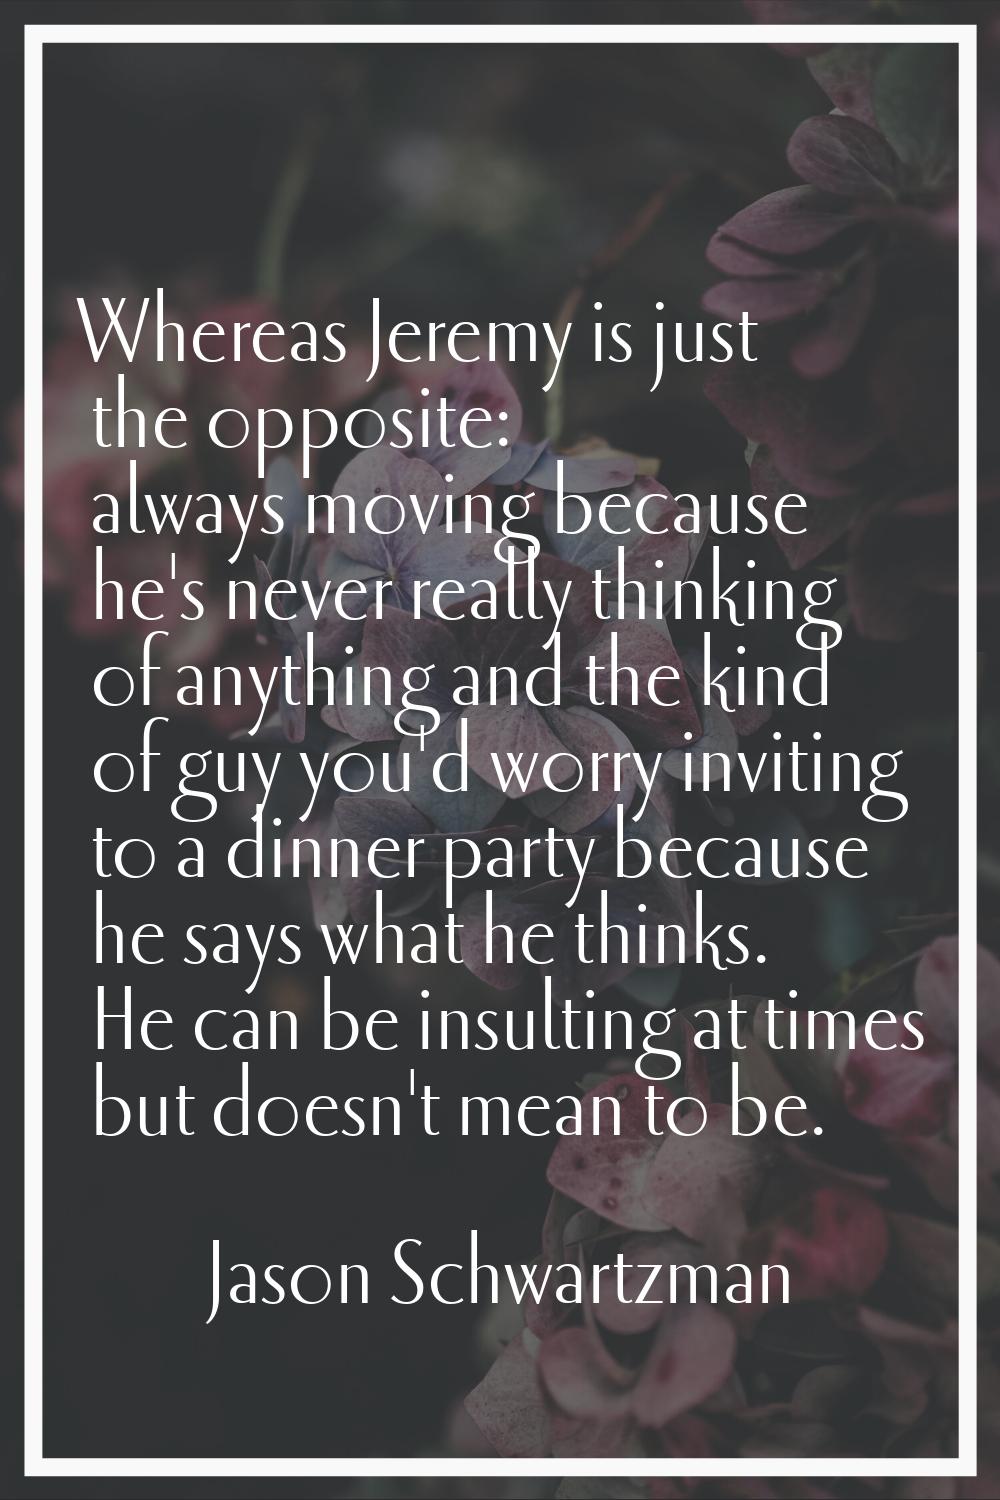 Whereas Jeremy is just the opposite: always moving because he's never really thinking of anything a